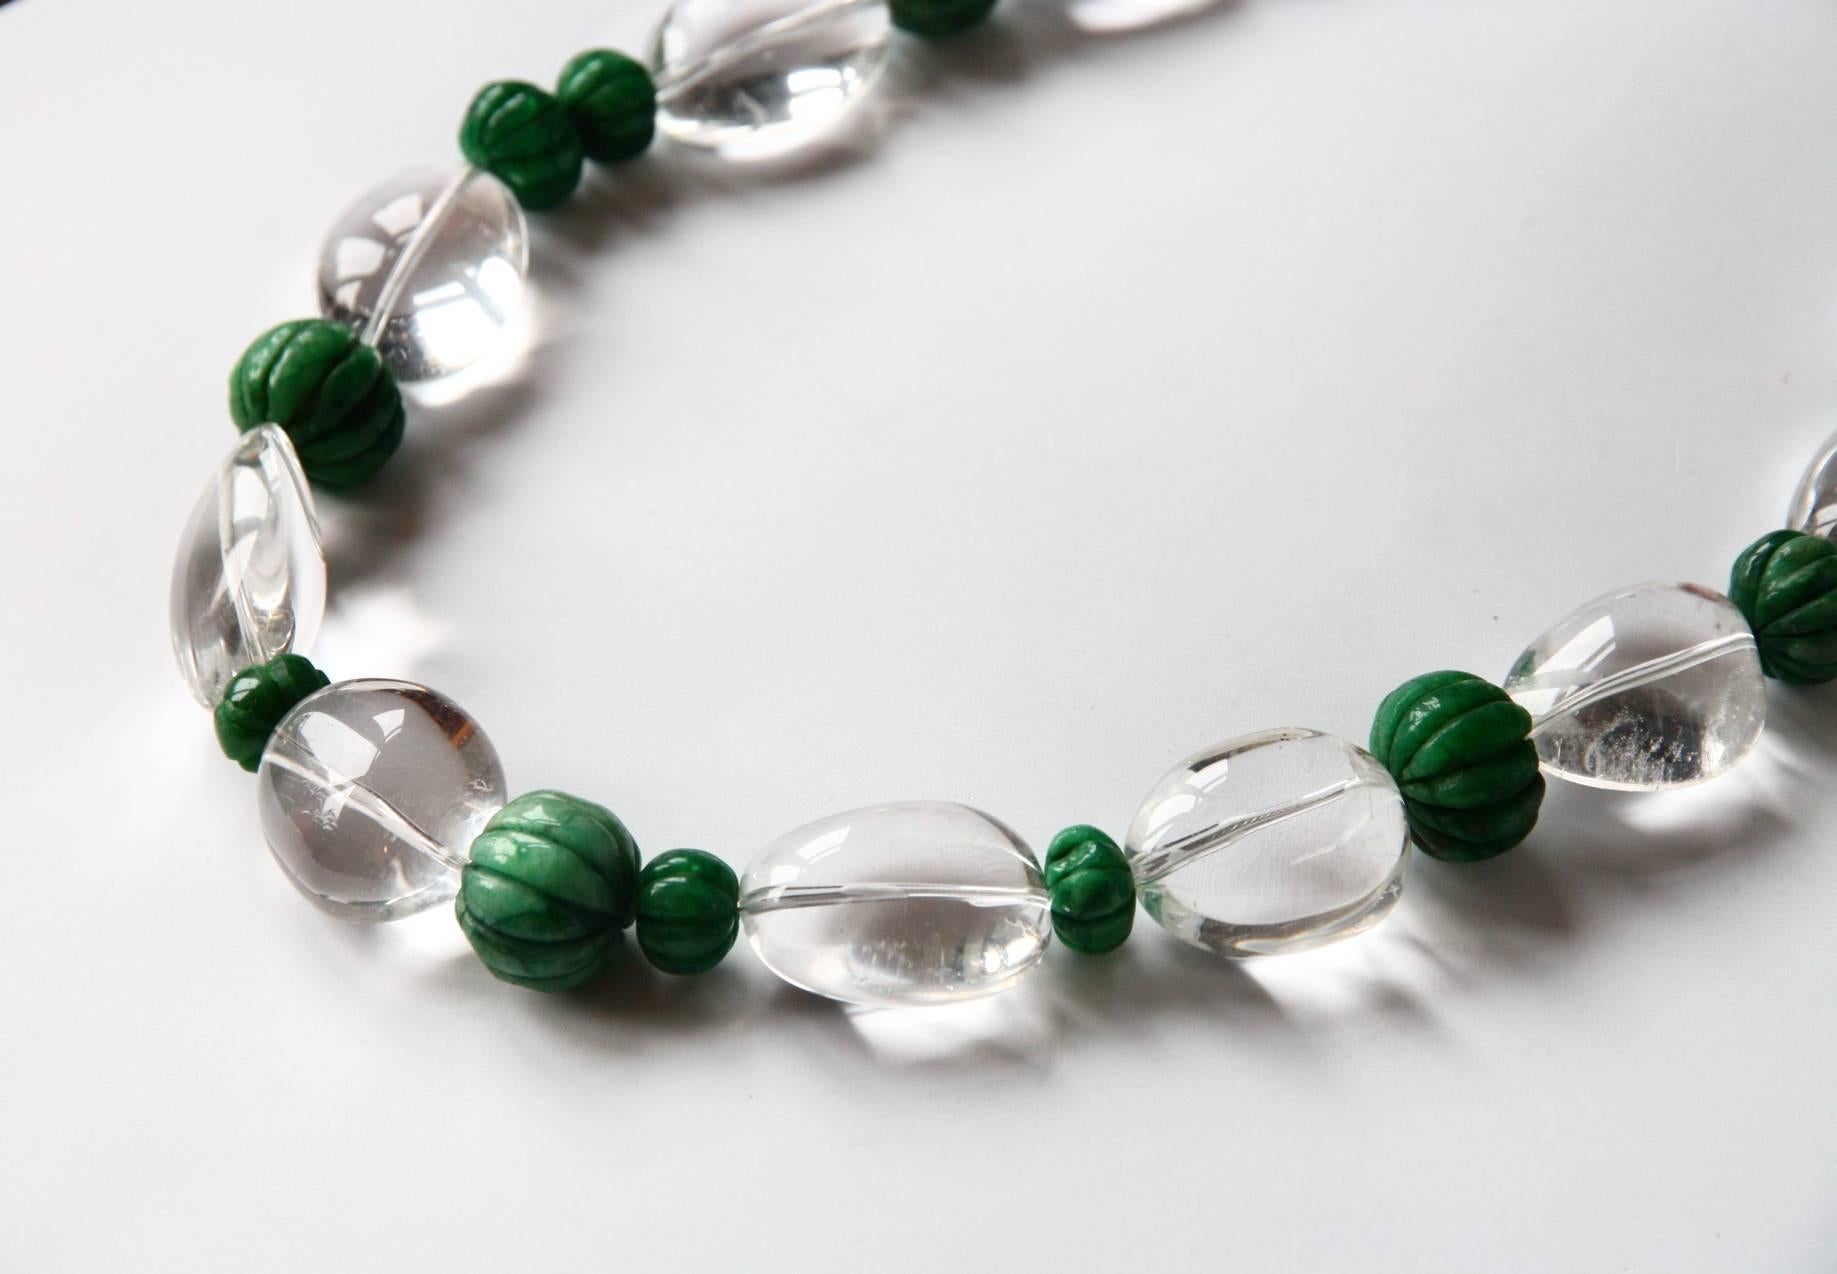 Very nice long crystal quartz necklace with emerald pumpkins total length 62cm , the closer is in silver.

All Giulia Colussi jewelry is new and has never been previously owned or worn. Each item will arrive at your door beautifully gift wrapped in